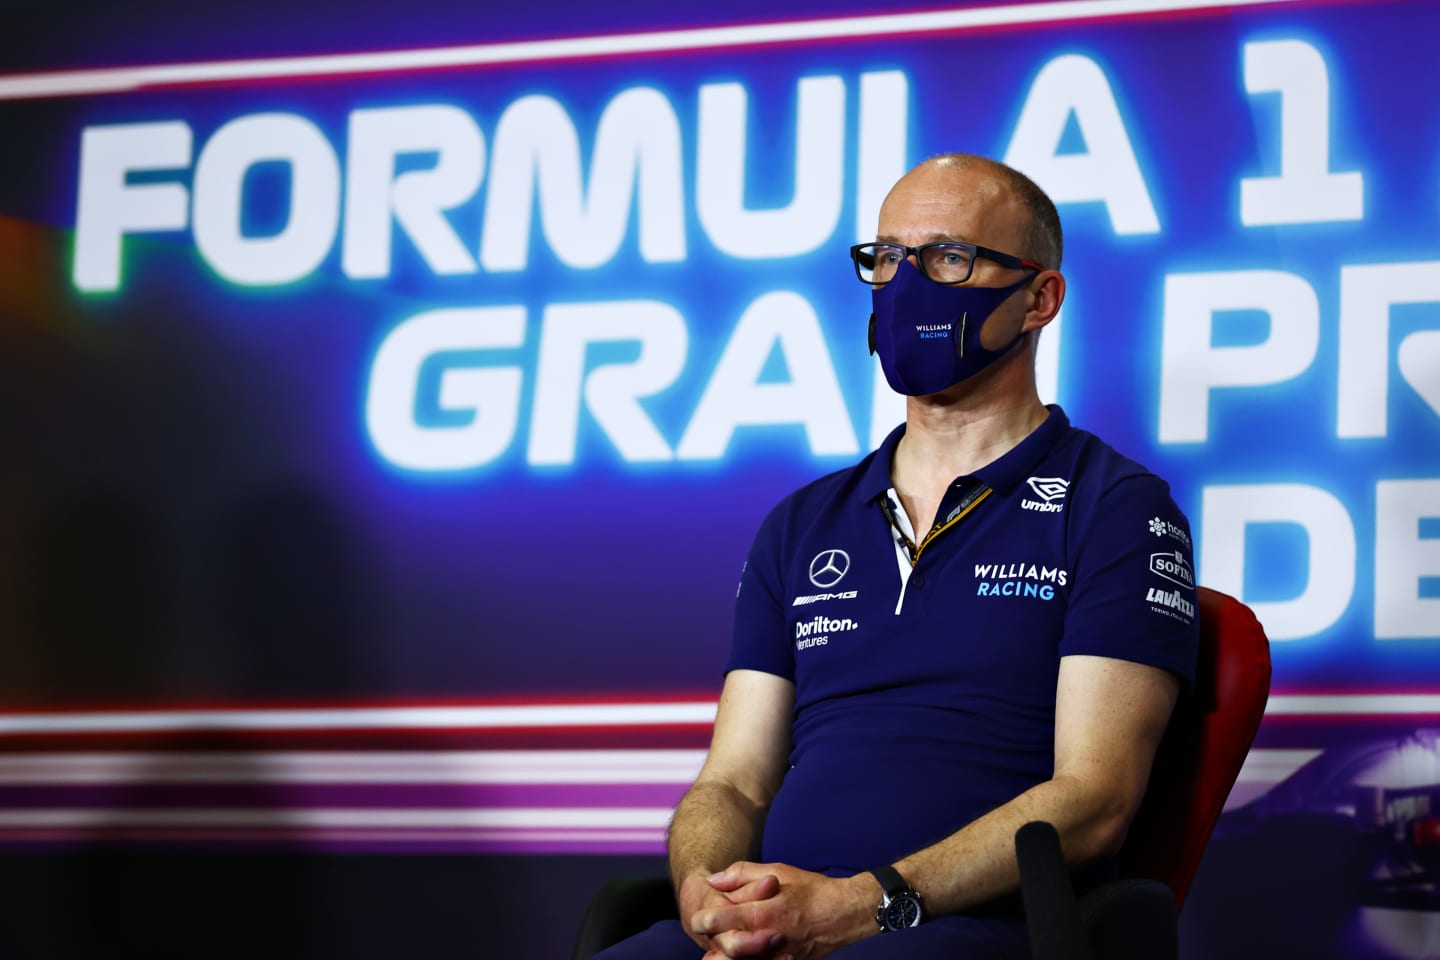 BARCELONA, SPAIN - MAY 07: Williams Team Principal Simon Roberts talks in the Team Principals Press Conference during practice for the F1 Grand Prix of Spain at Circuit de Barcelona-Catalunya on May 07, 2021 in Barcelona, Spain. (Photo by Dan Istitene/Getty Images)